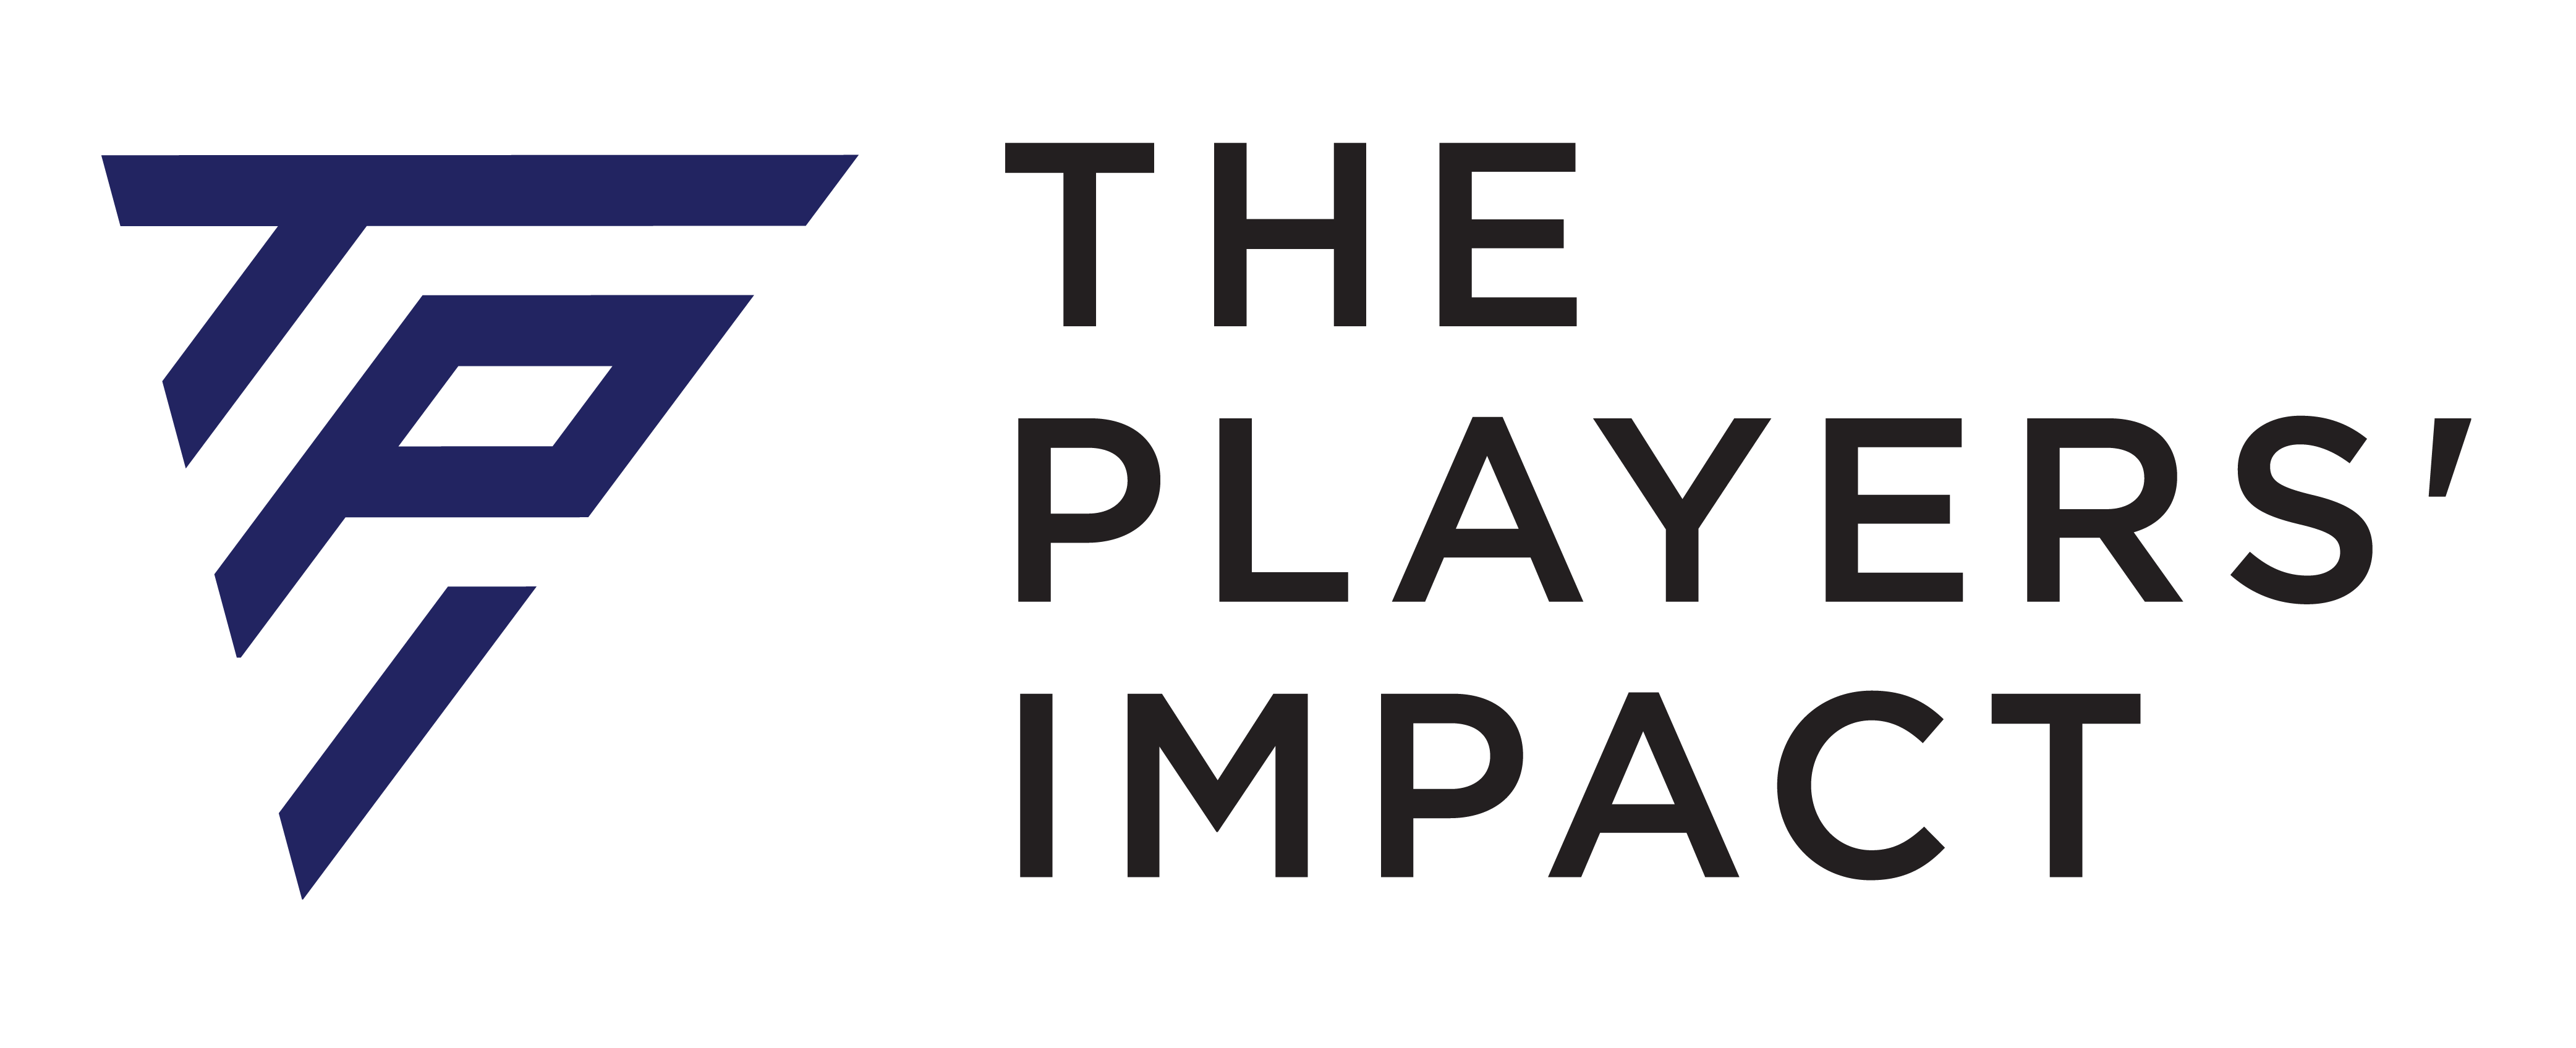 The Players Impact logo